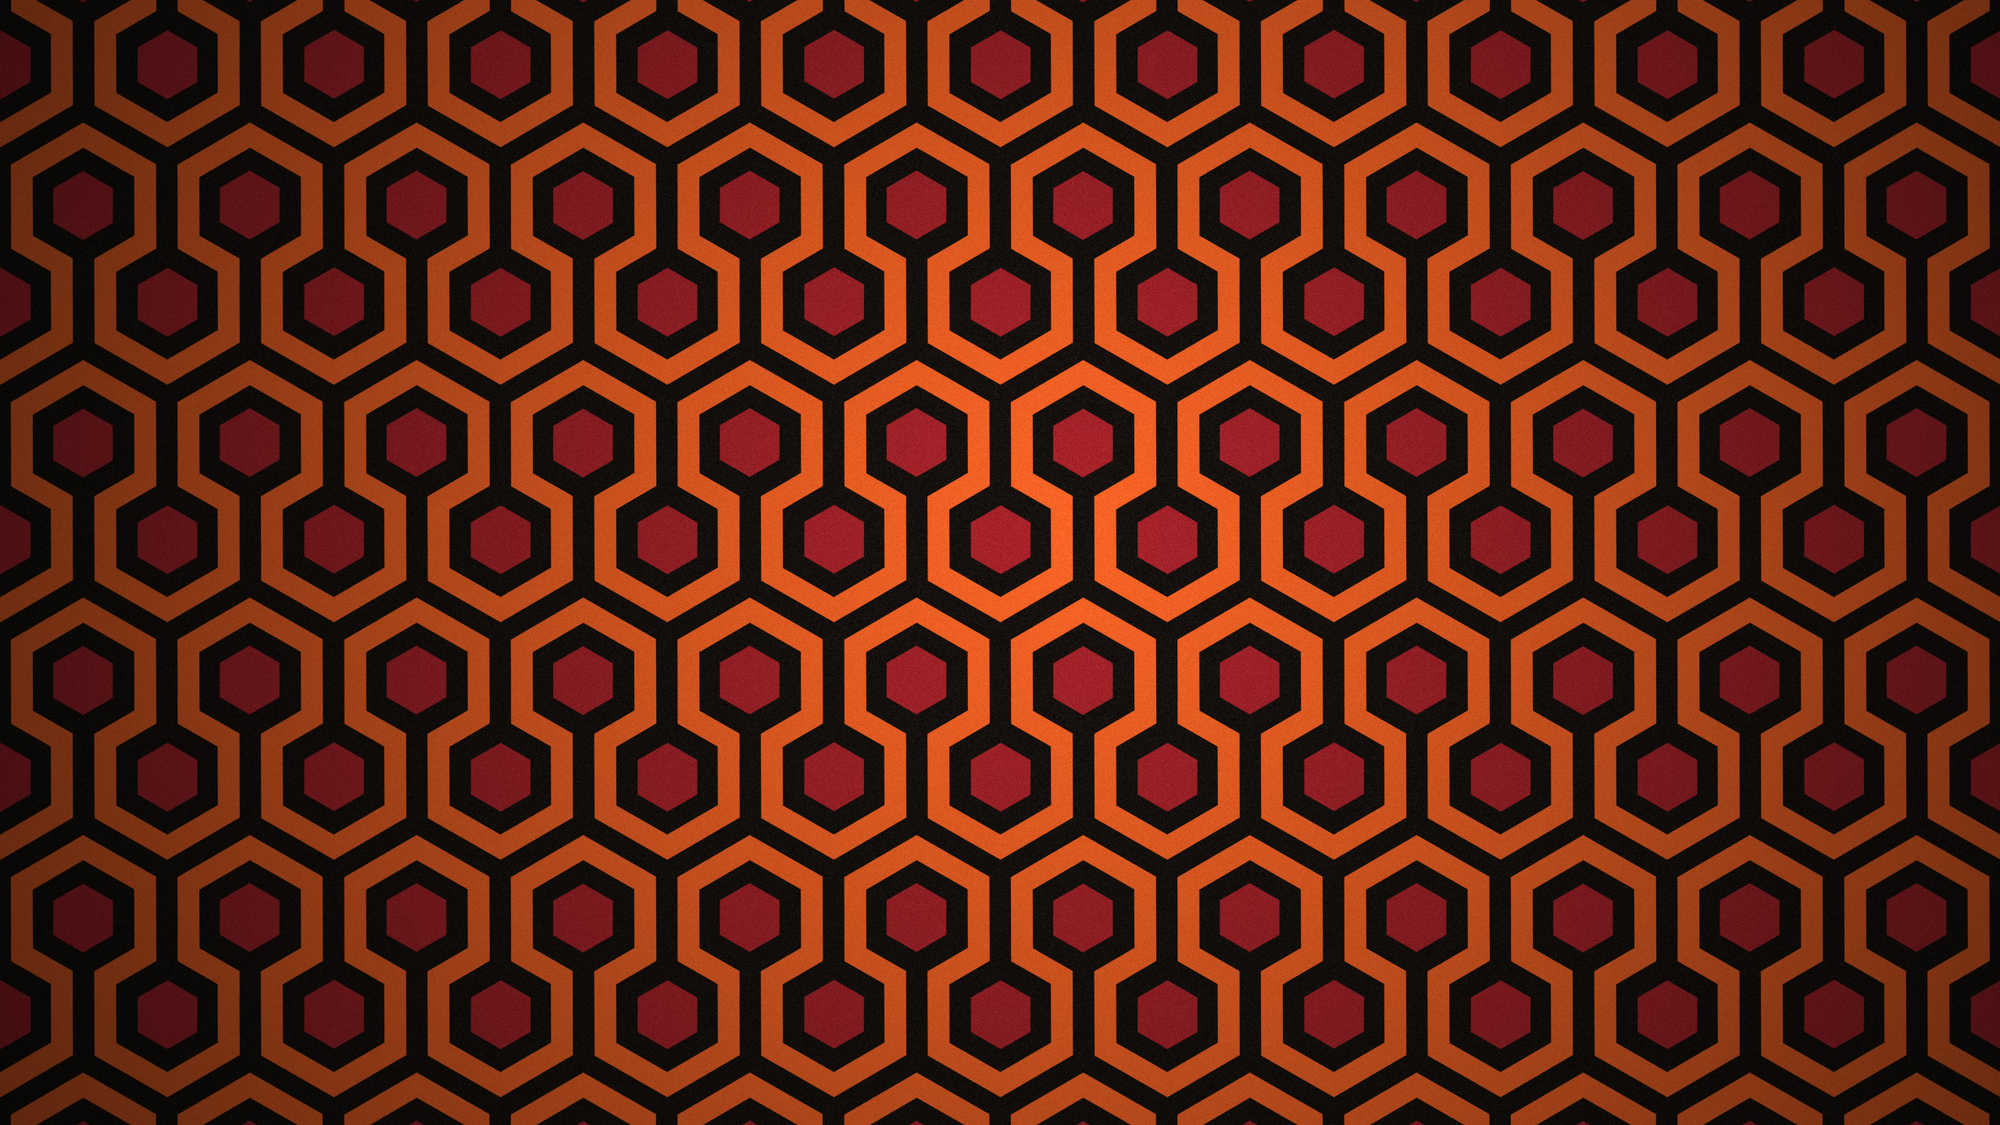 Room 237: Being an Inquiry into The Shining in 9 Parts (image 1)